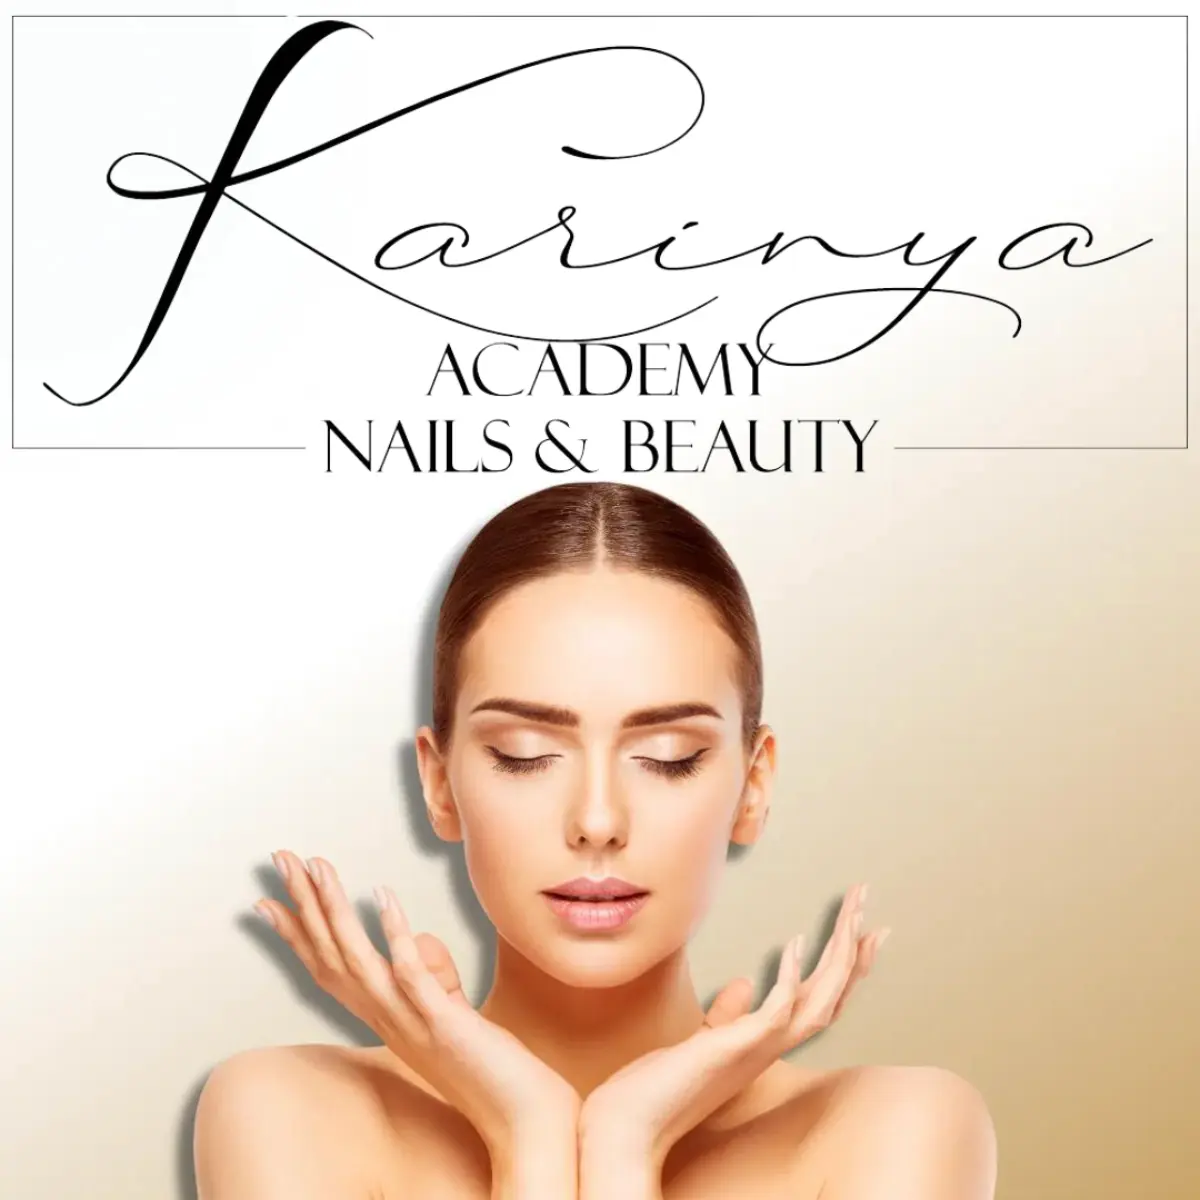 Karinya Redefines Beauty and Wellness with State-of-the-Art Treatments and Massages